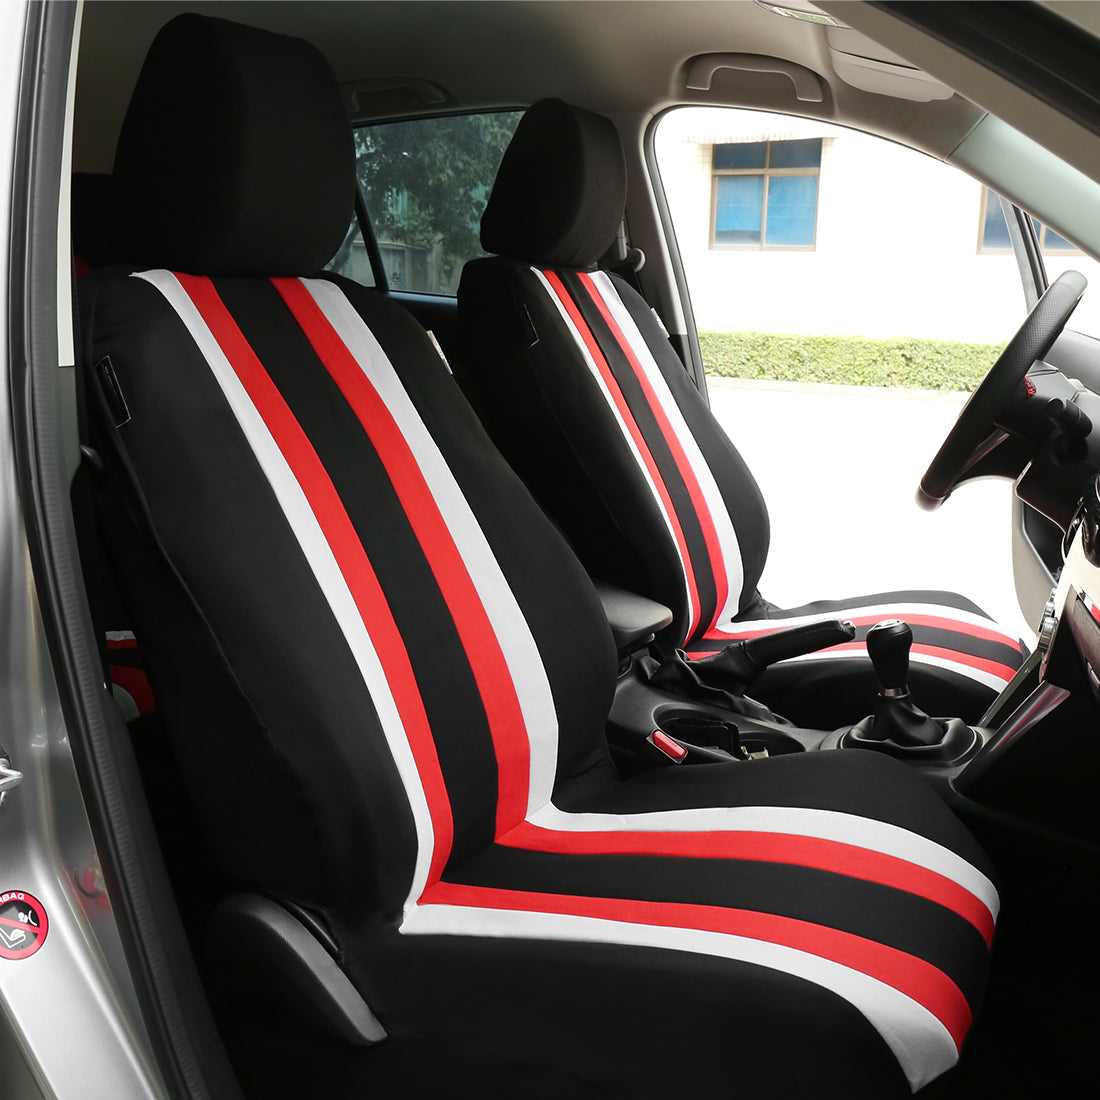 uxcell Uxcell Universal Front Back Seat Cover Cushion Mat Protector for Car SUV Truck Black Red White Polyester Mesh 8pcs